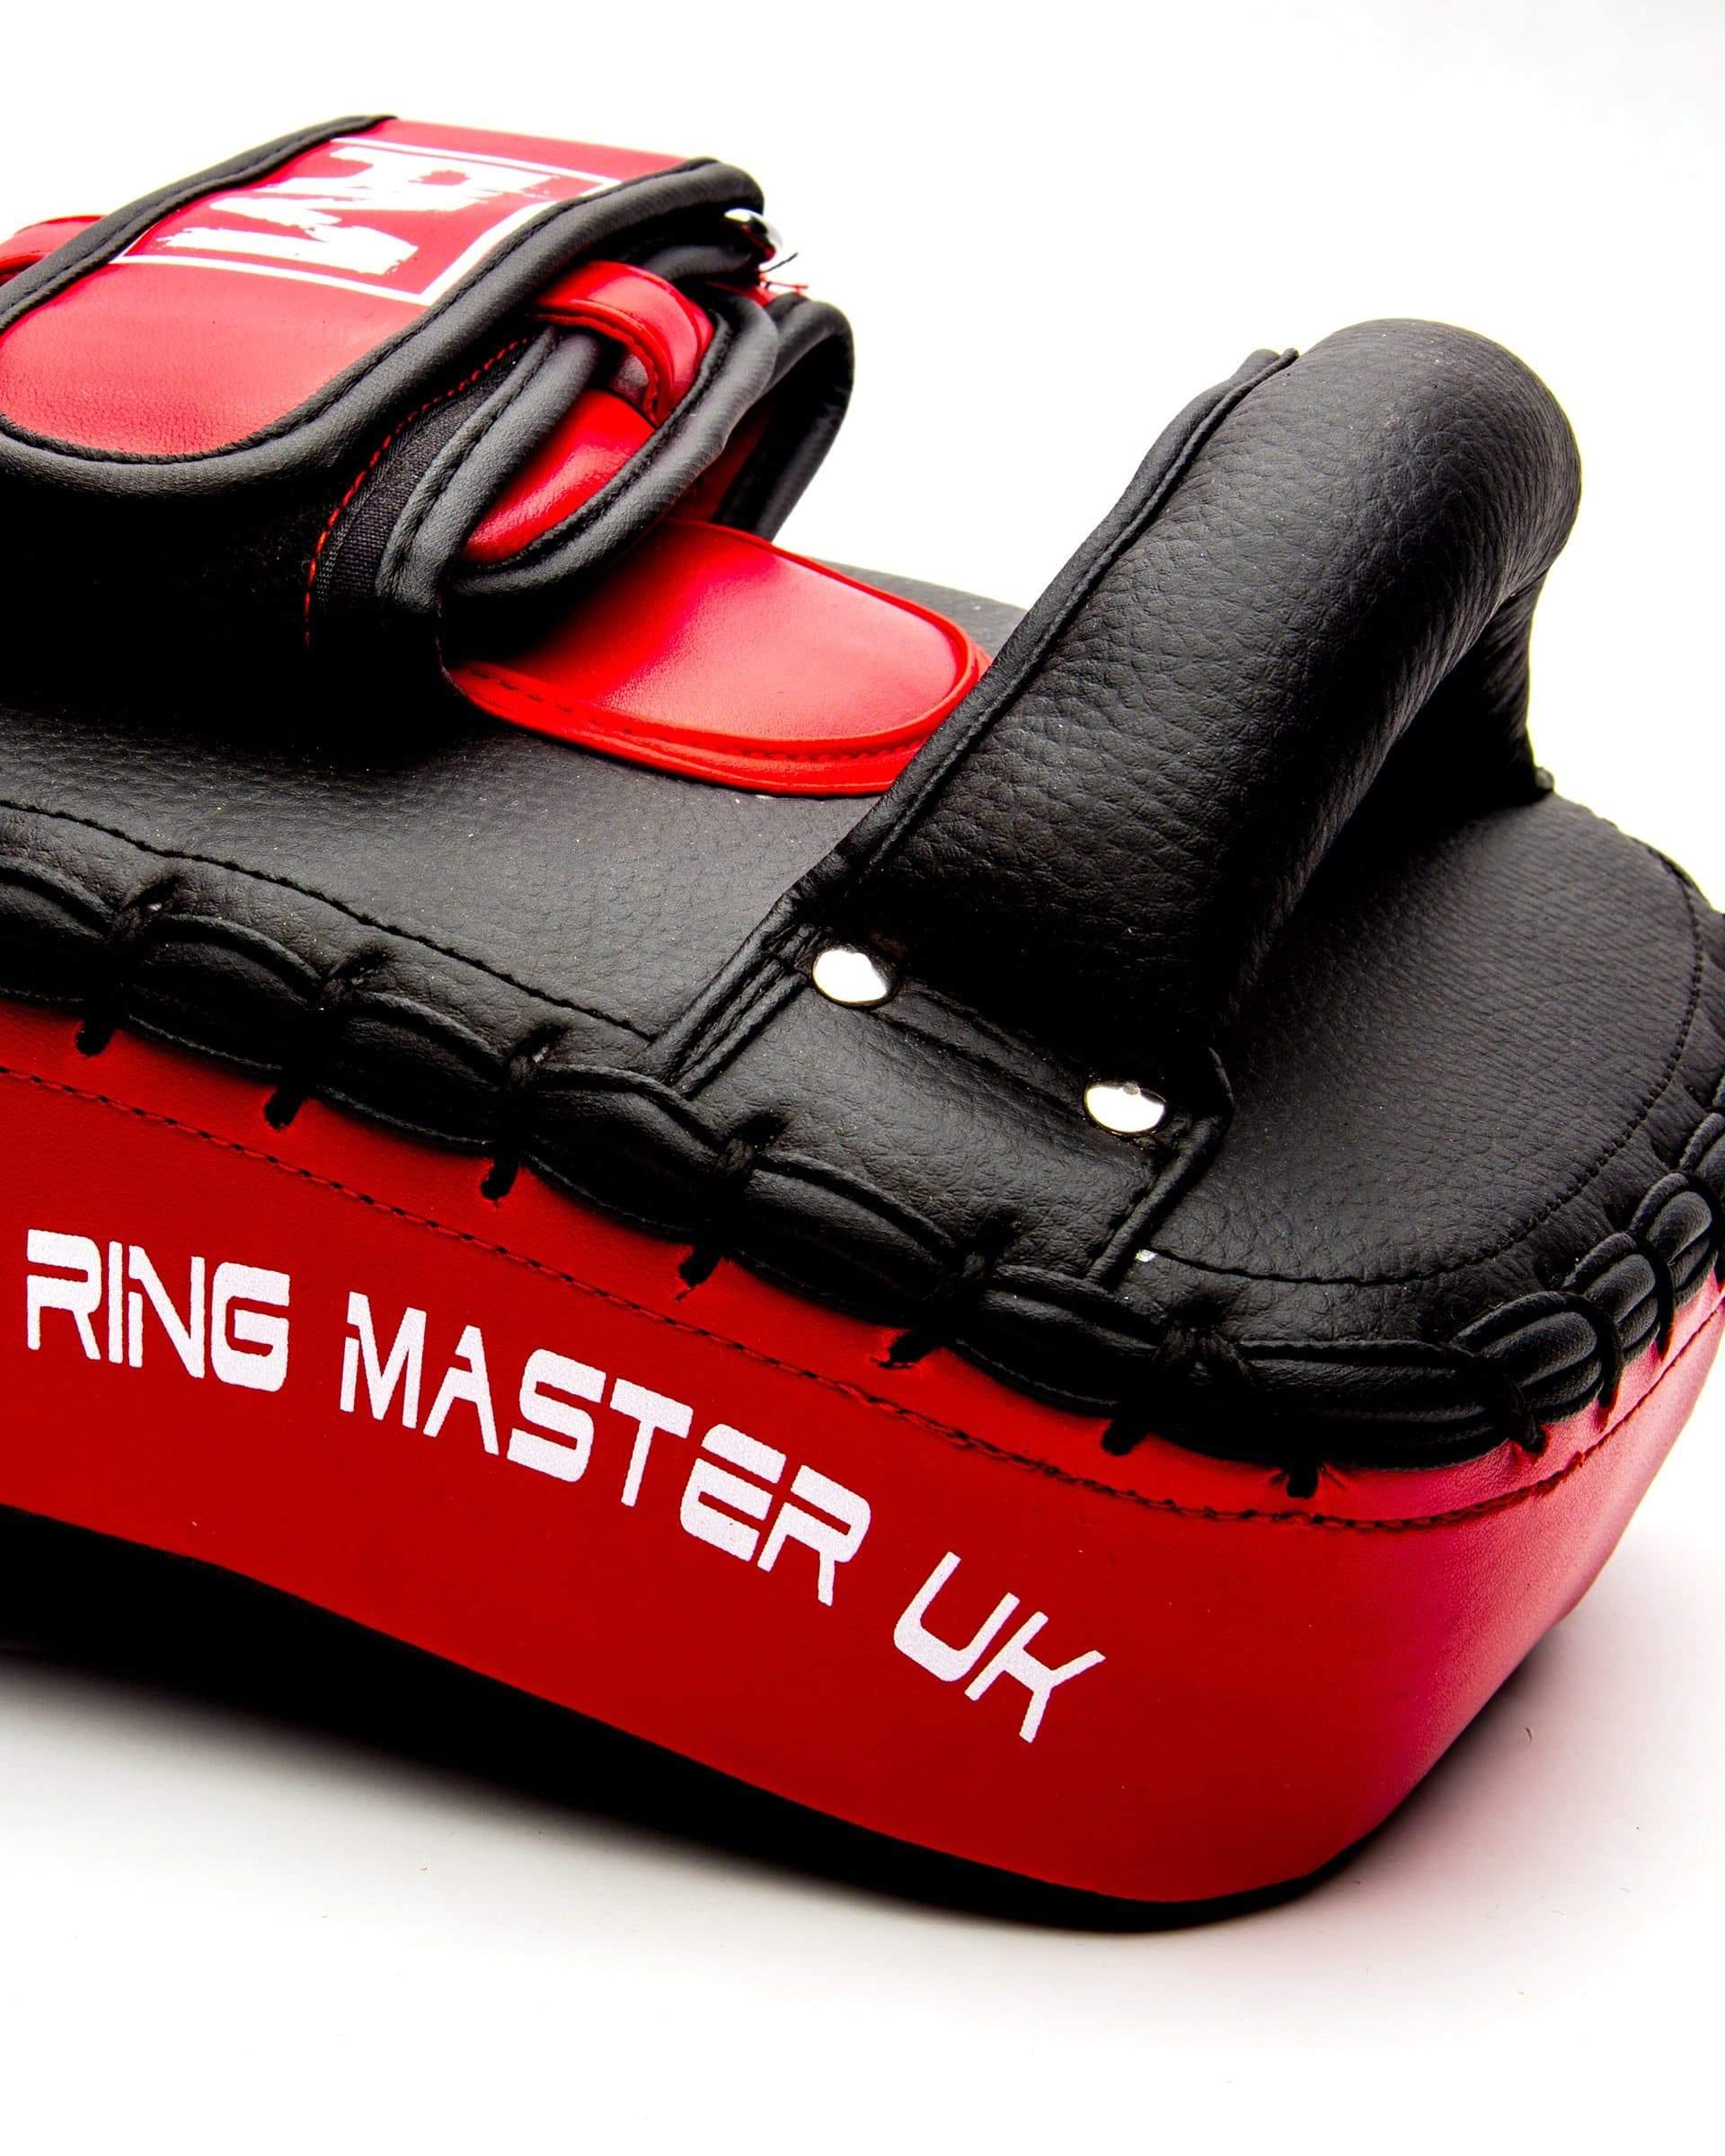 RingMaster Sports One Size Arm Pads Synthetic Leather Black and Red (Single Item) Image 1